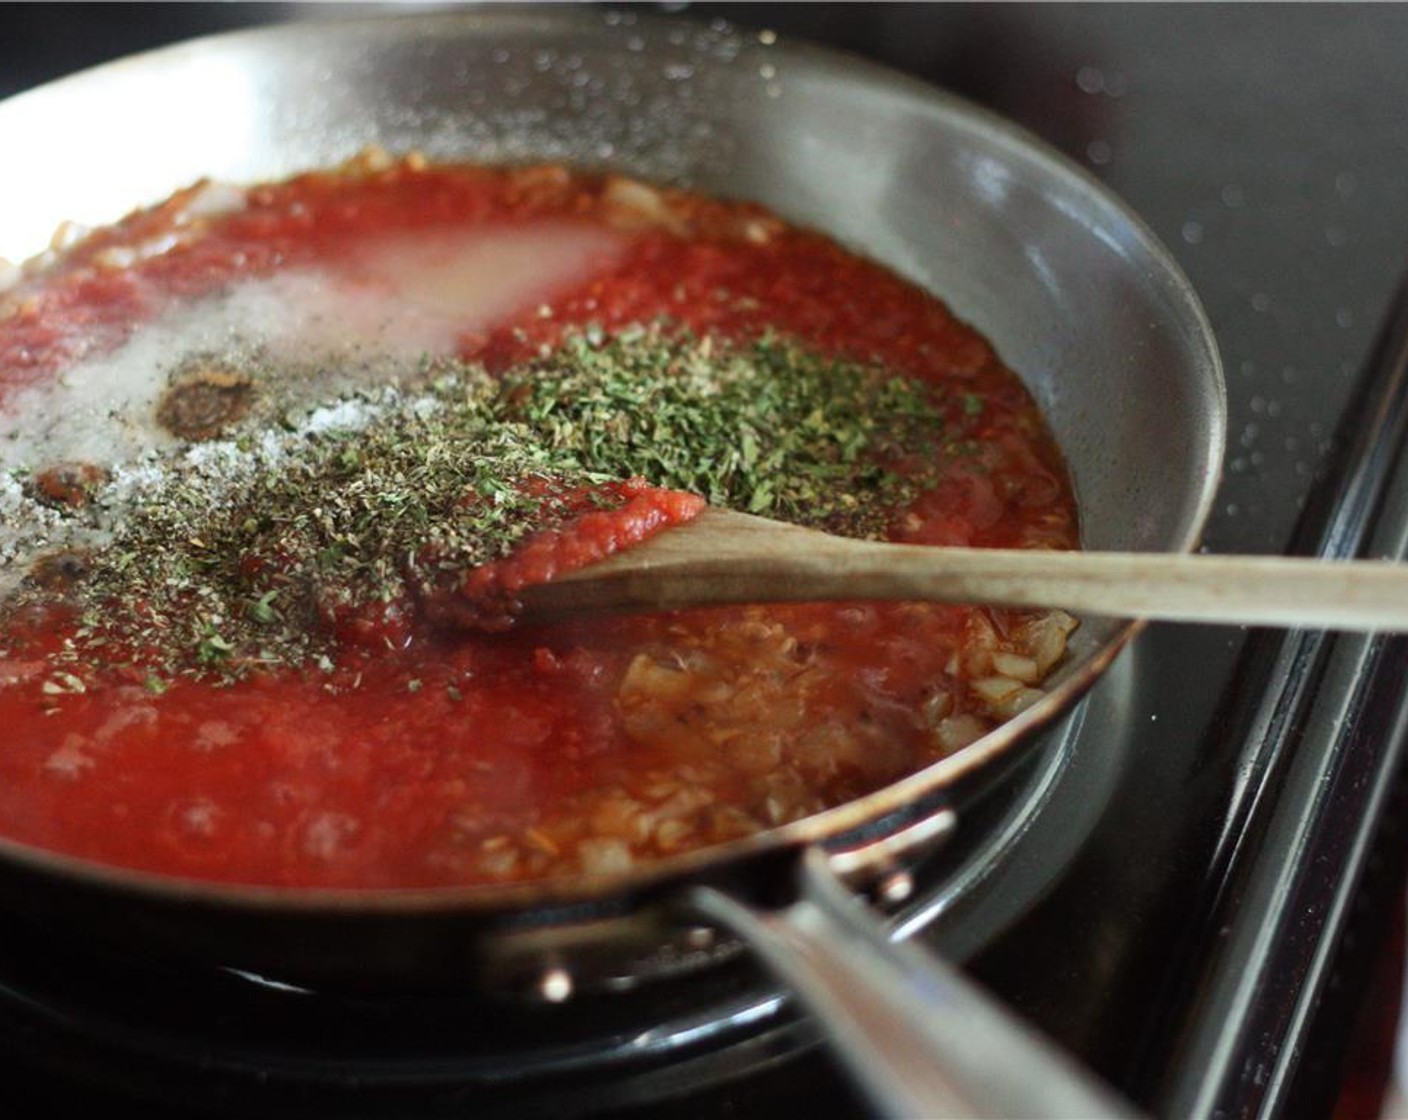 step 2 Add in Tomato Sauce (2 cups), Granulated Sugar (1 Tbsp), Dried Parsley (1 tsp), Dried Thyme (1/4 tsp), Salt (1 tsp), Dried Basil (1 tsp), Dried Oregano (1/2 tsp), and Ground Black Pepper (1 pinch) and bring to a boil. Cook until sauce has reached desired consistency.